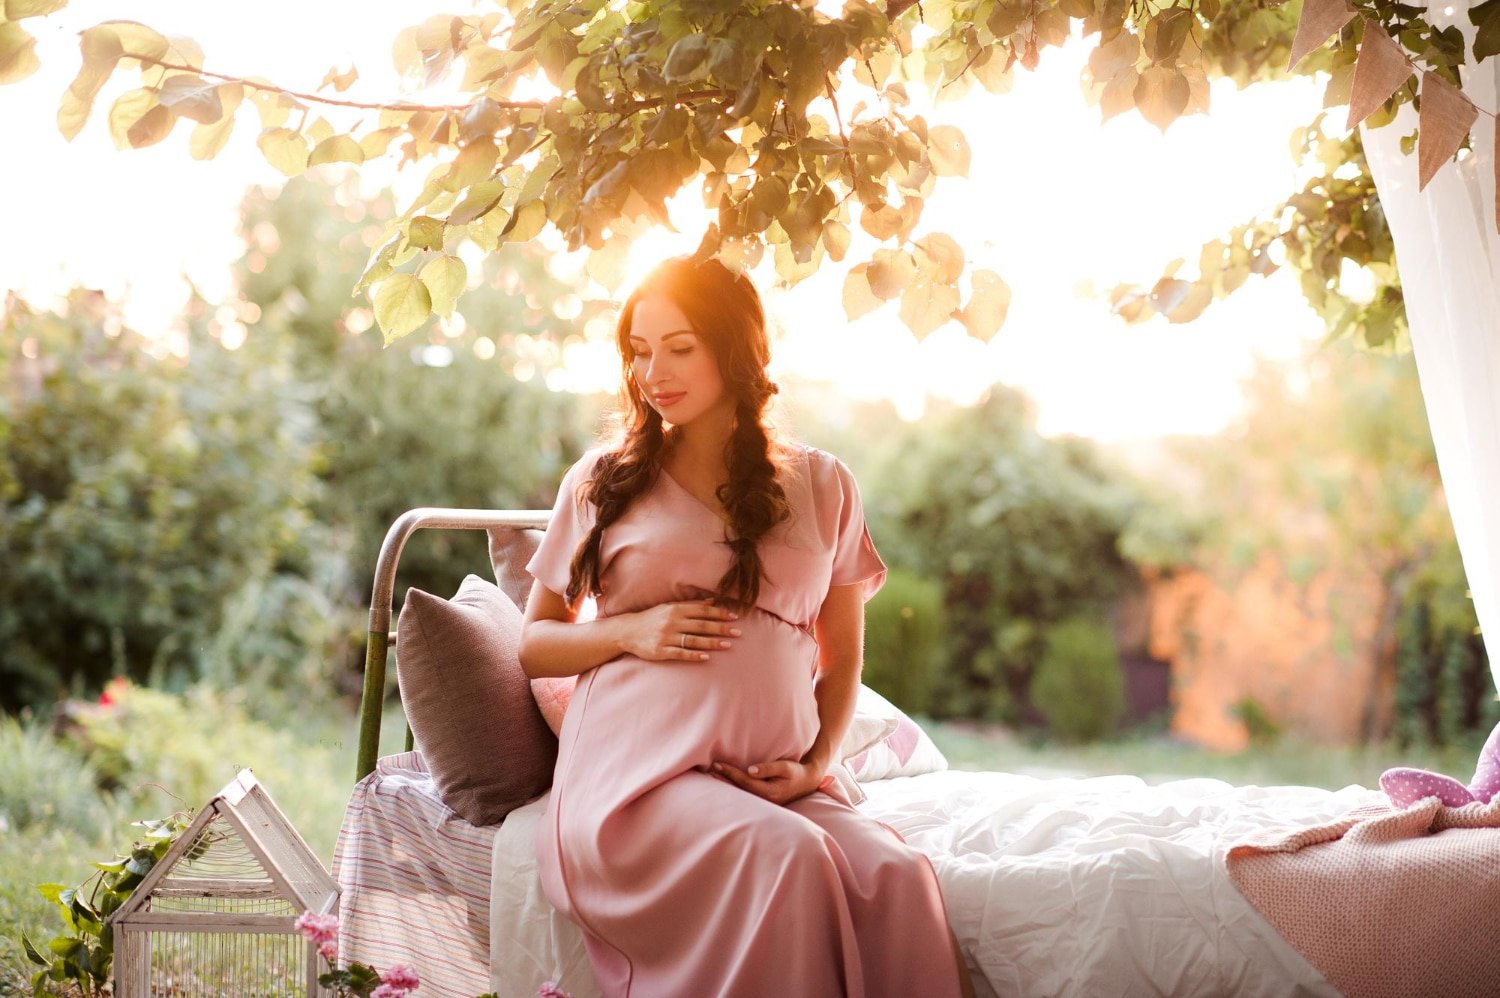 PinkBlush Maternity: Stylish and Comfortable Fashion for Moms-to-Be